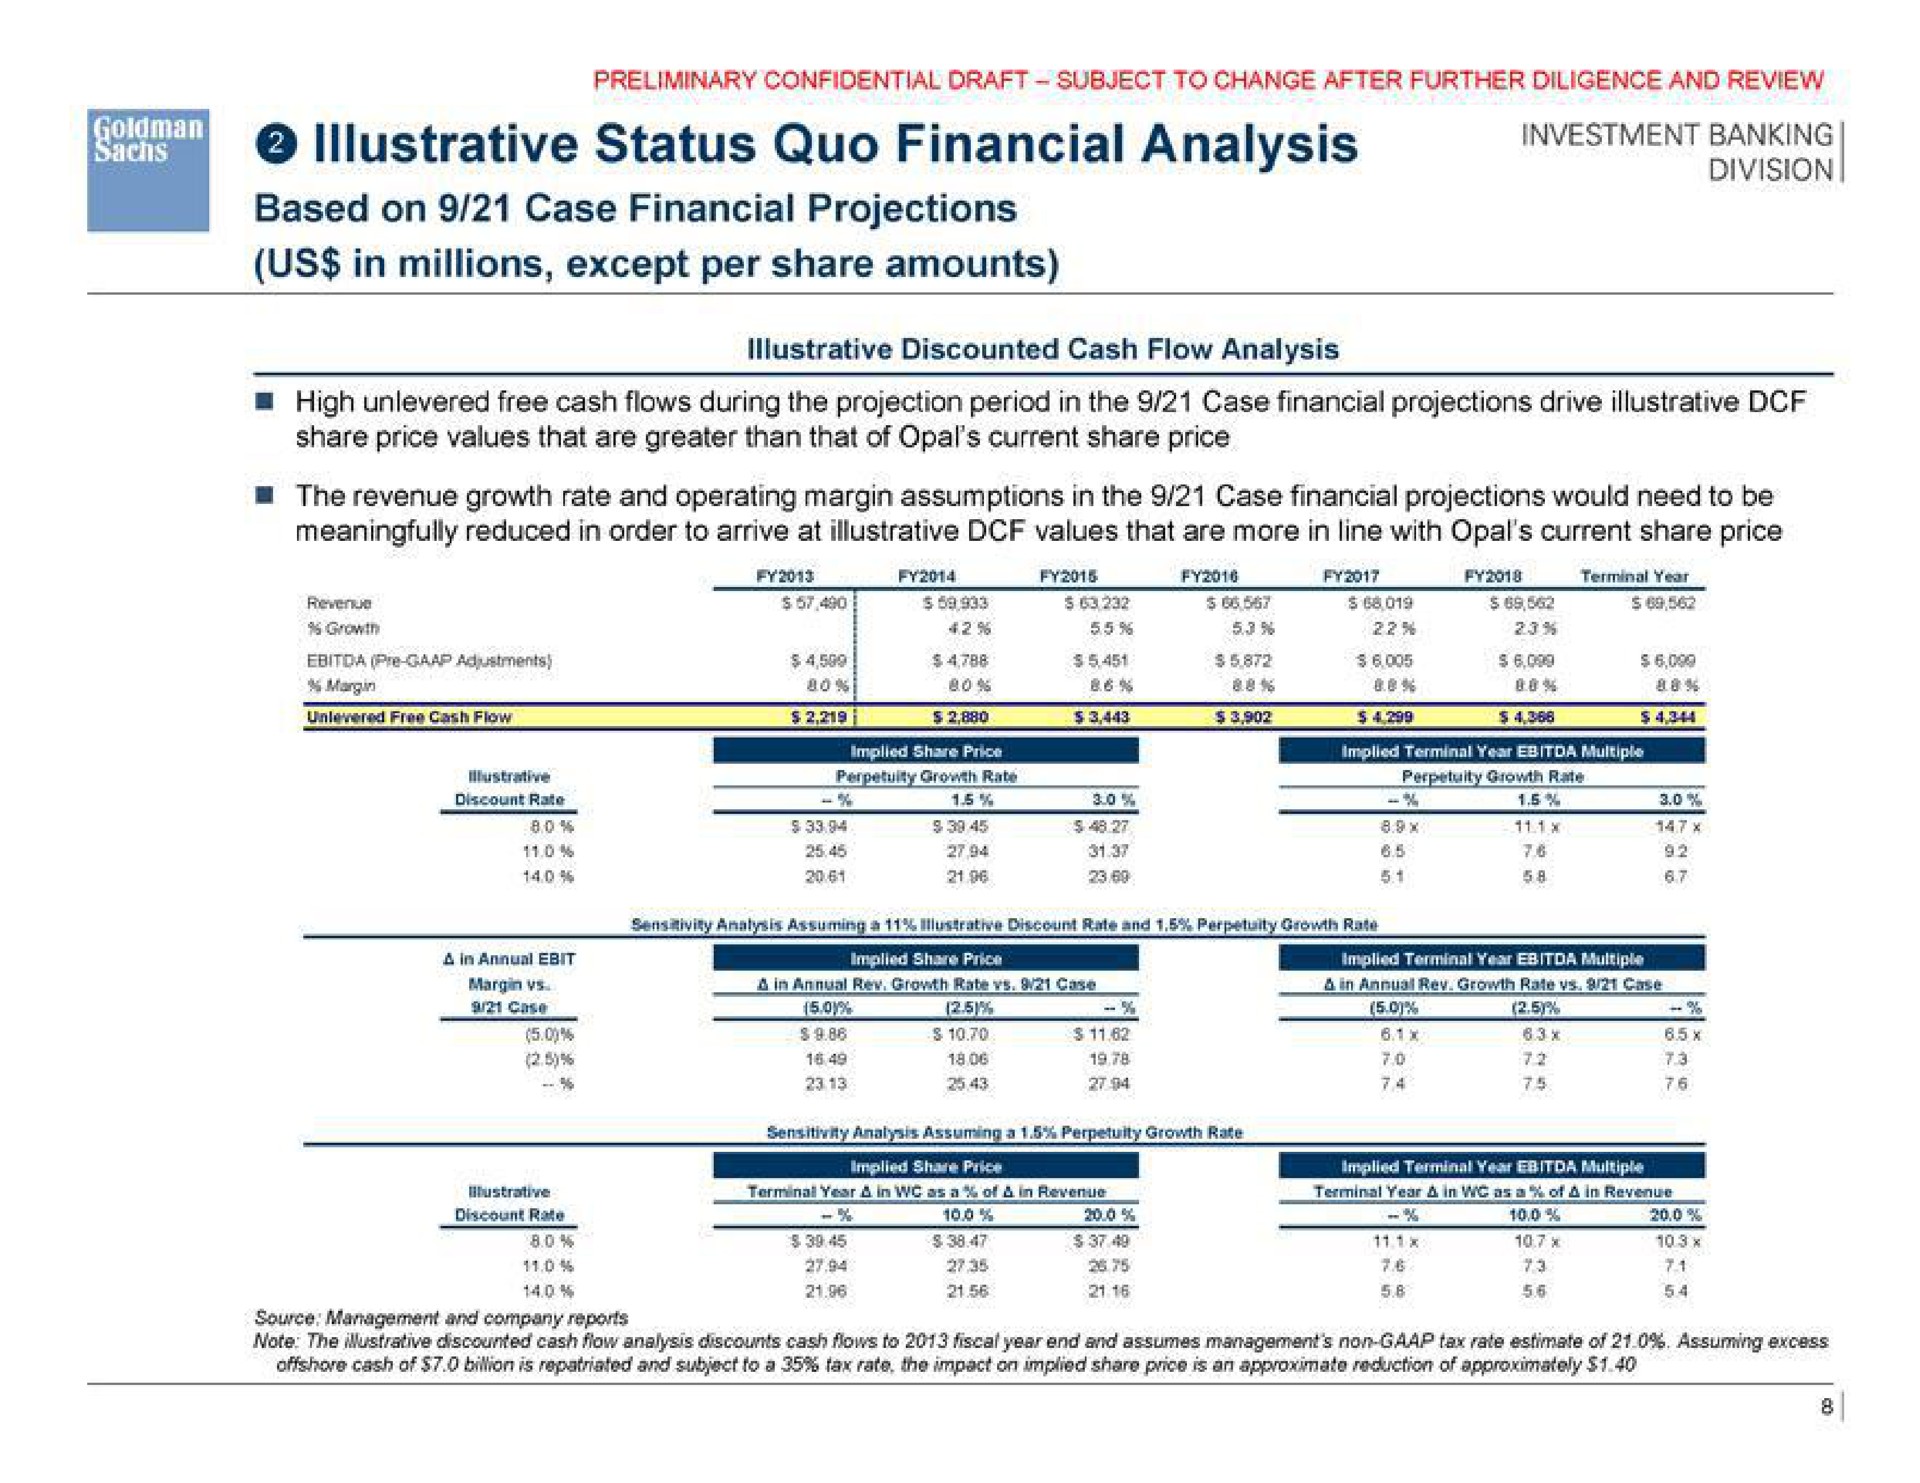 illustrative status quo financial analysis based on case financial projections us in millions except per share amounts cee eer | Goldman Sachs